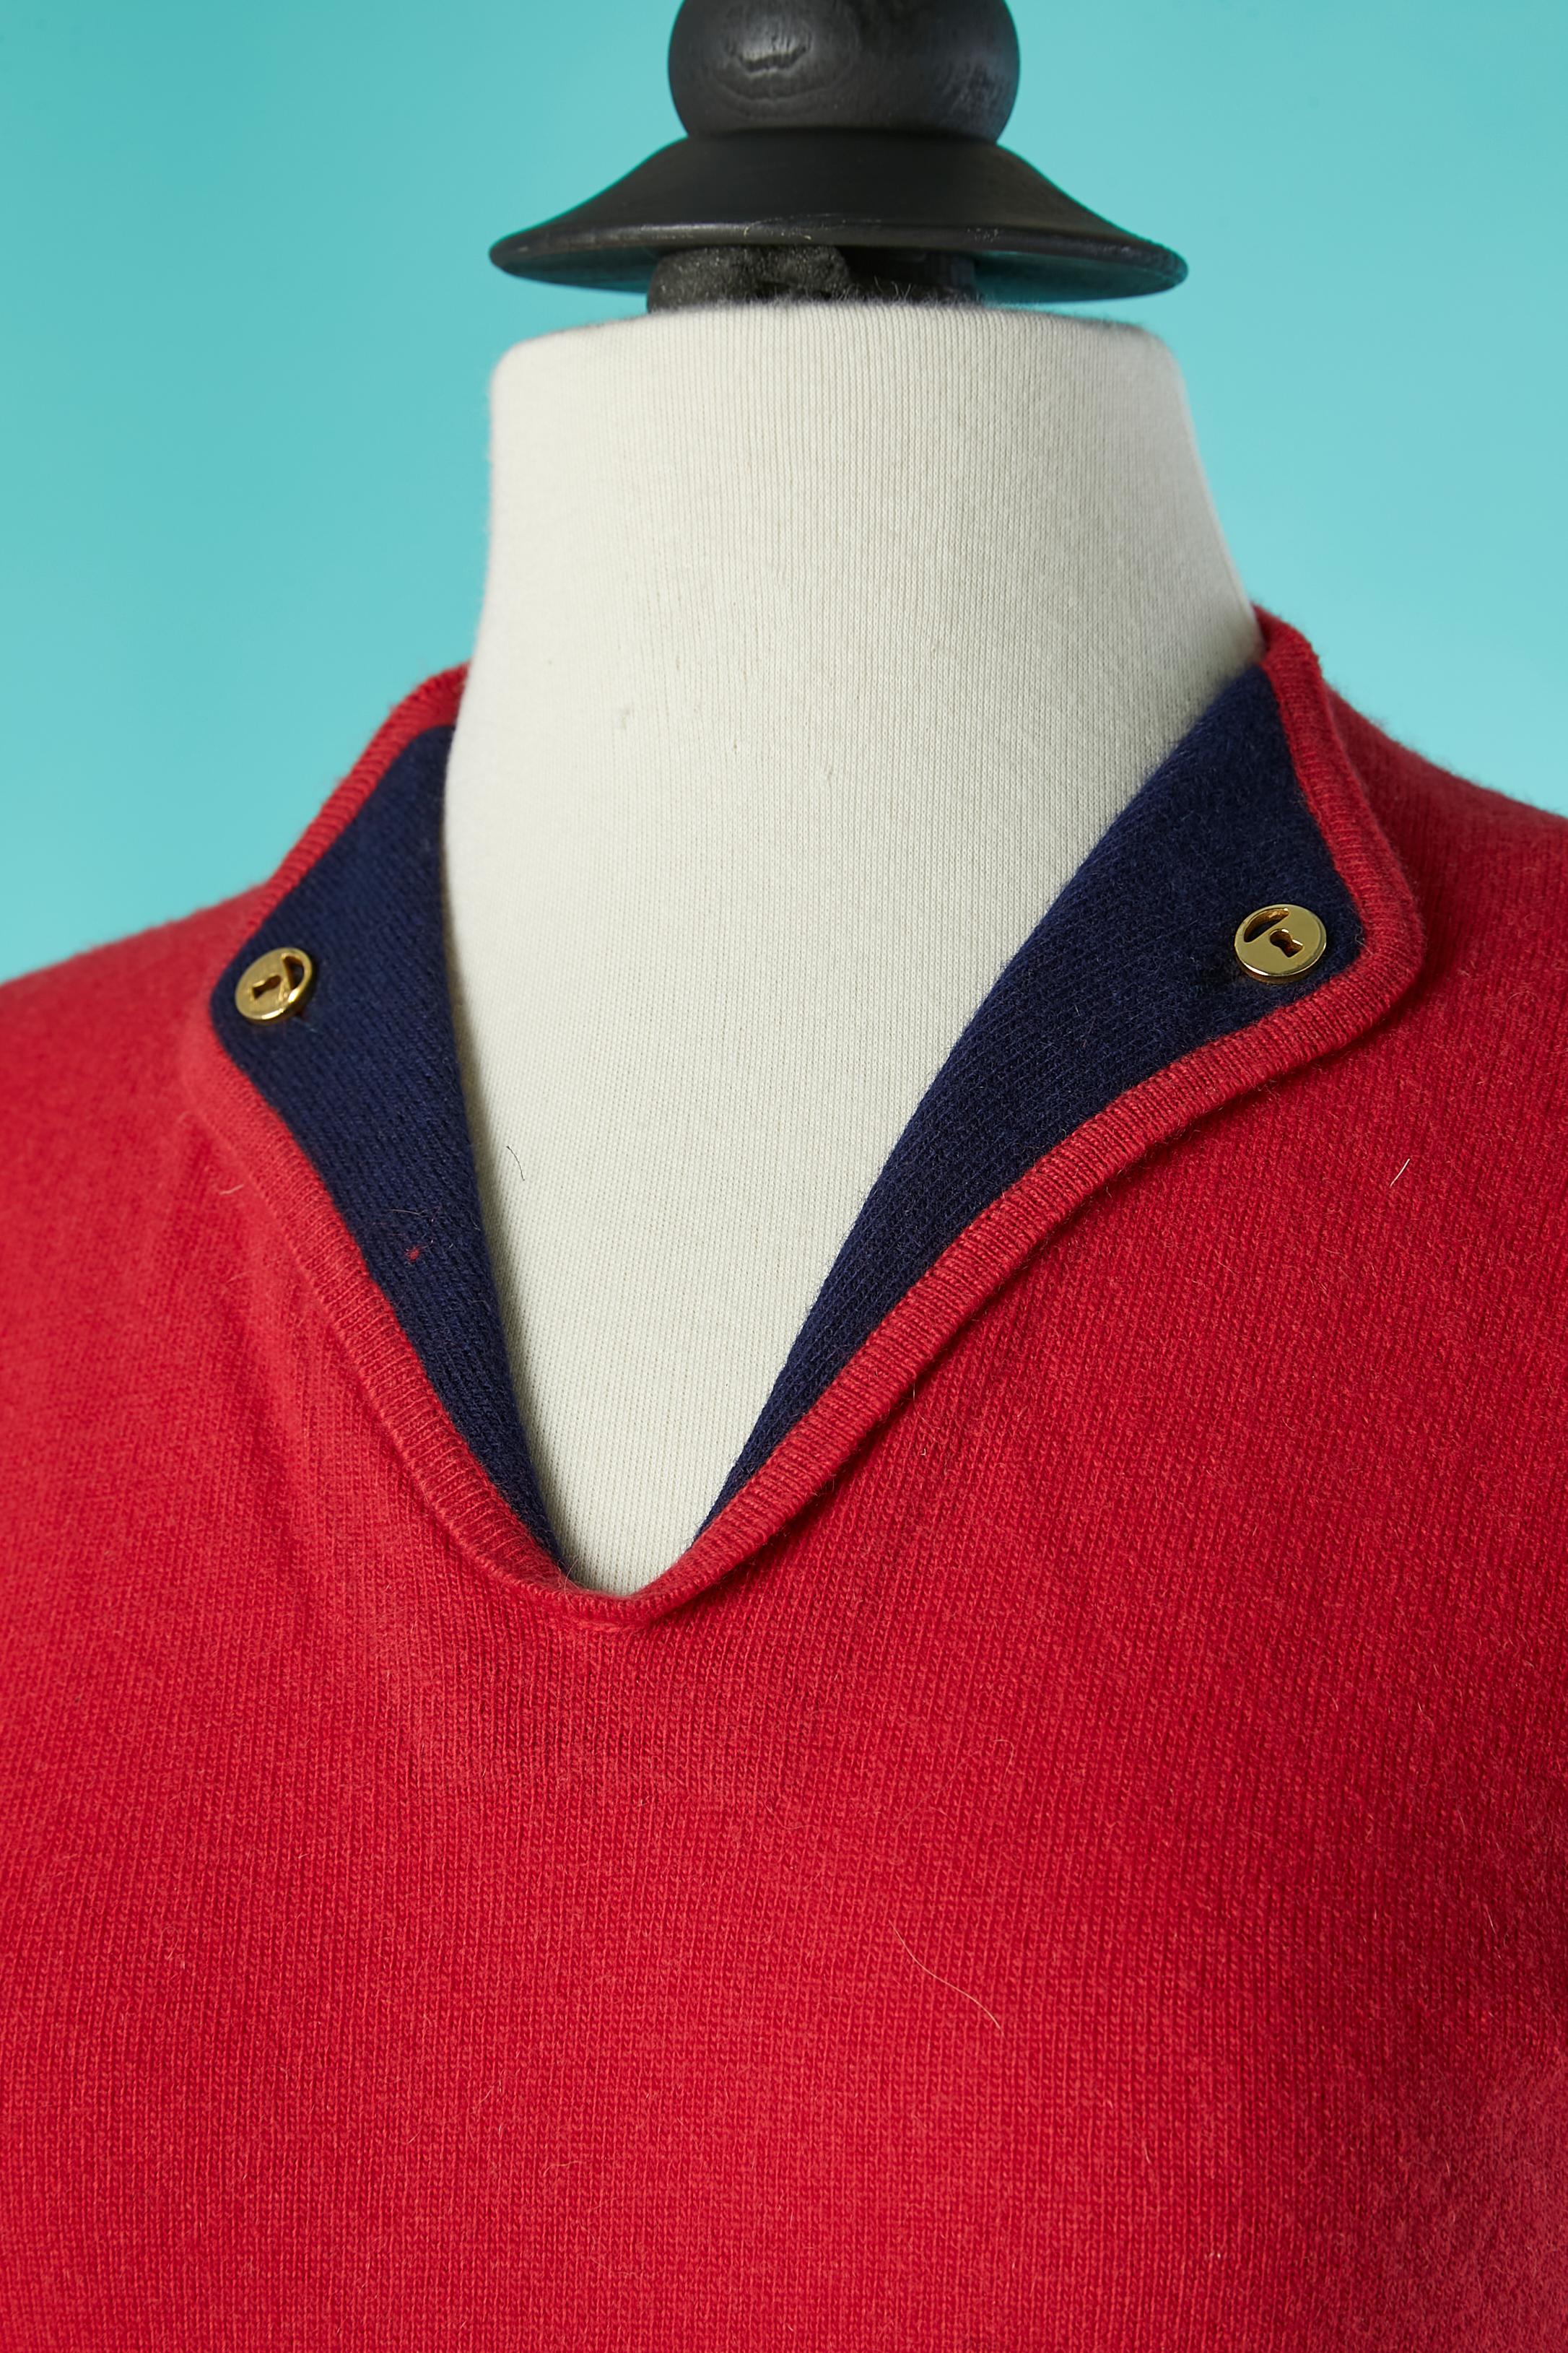 Red and navy blue cashmere sweater with gold metal buttons.
New with extra cashmere thread provided . Scotish cashmere 
SIZE S 